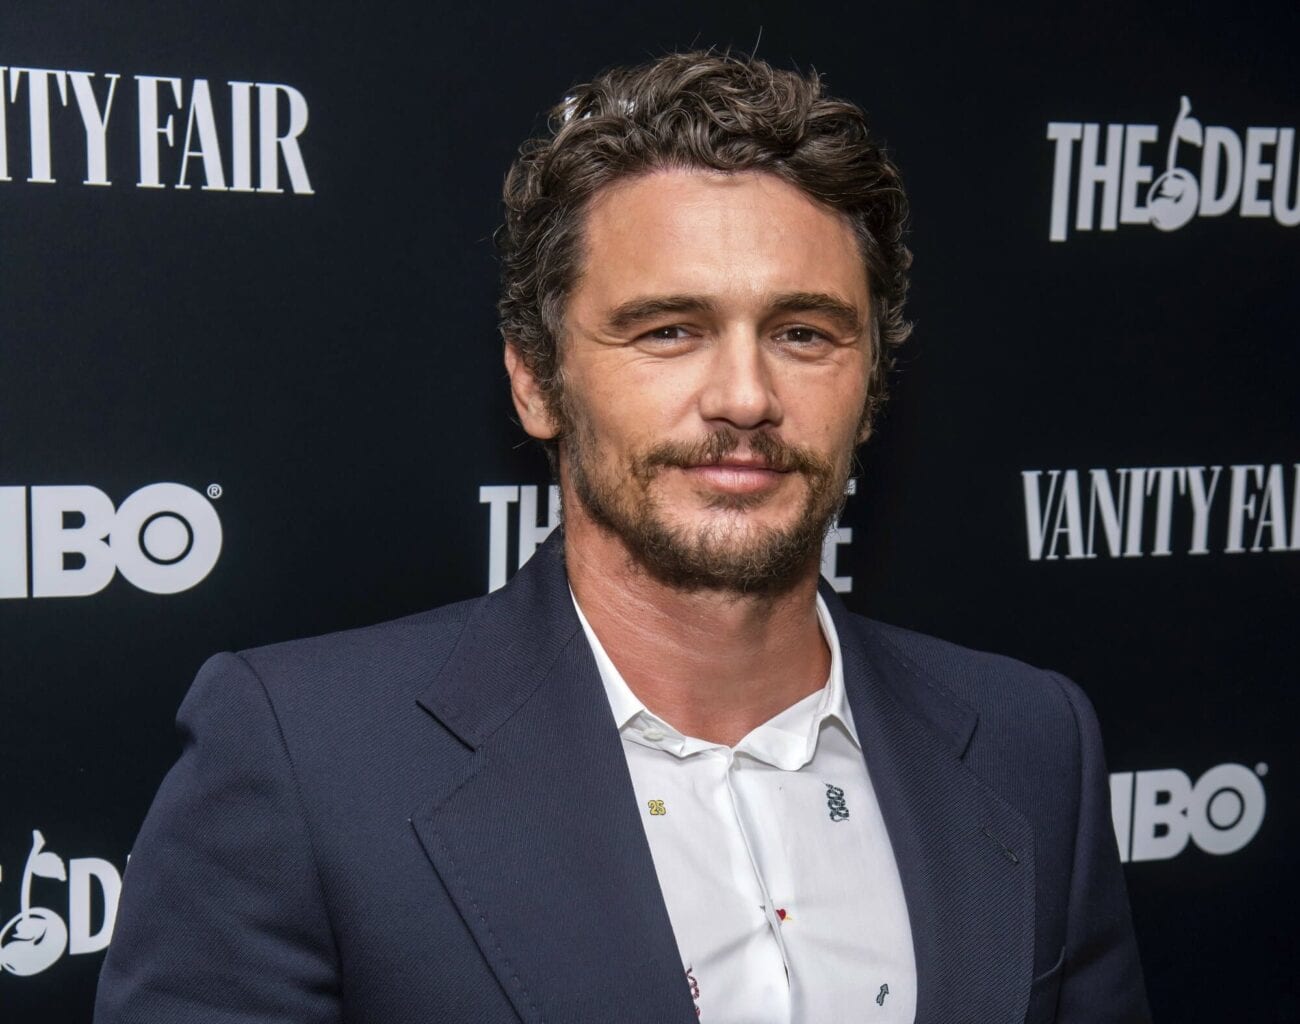 We thought we’d remind you about James Franco, who was accused of sexual harassment and messaging underage girls two years ago. Stop watching his movies.